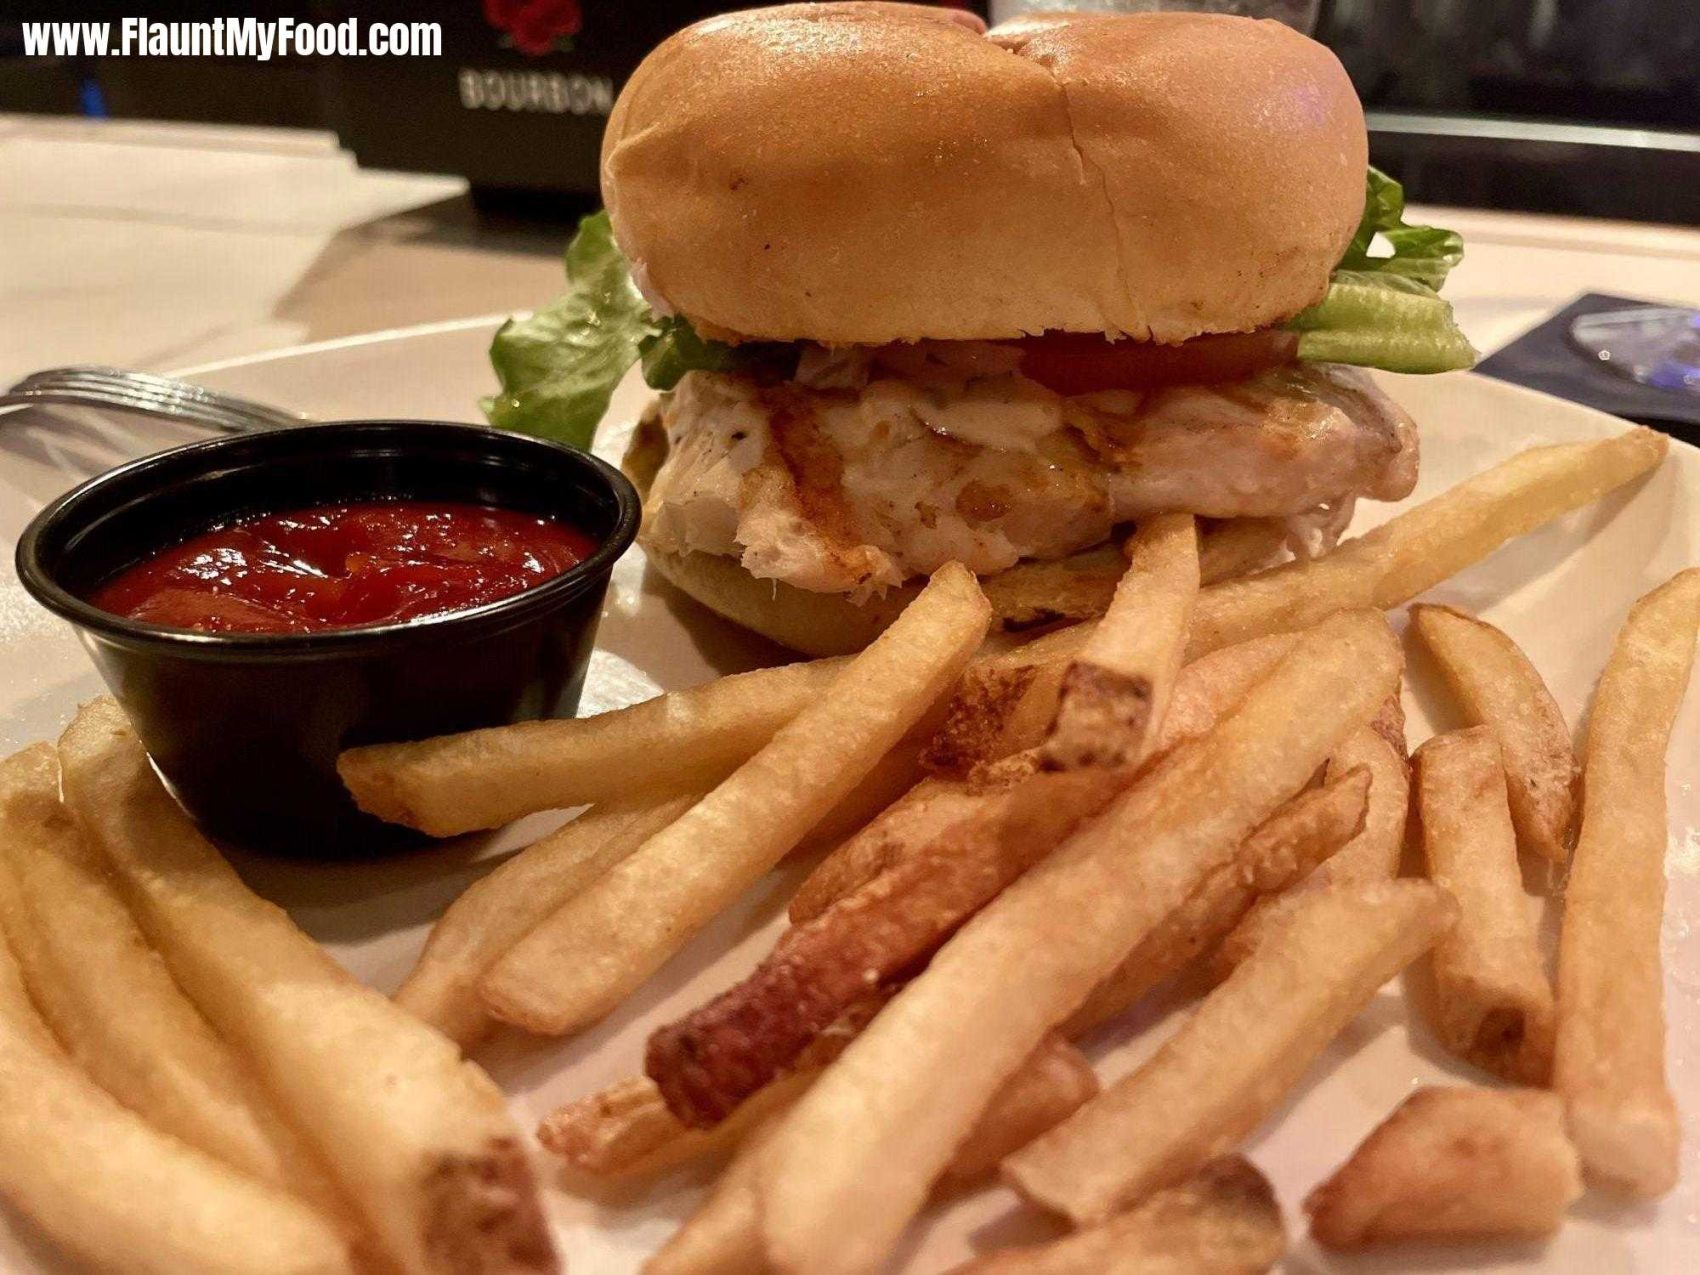 Grilled Grouper sandwich with fries at the dry dock Grill on longboat key island in Florida